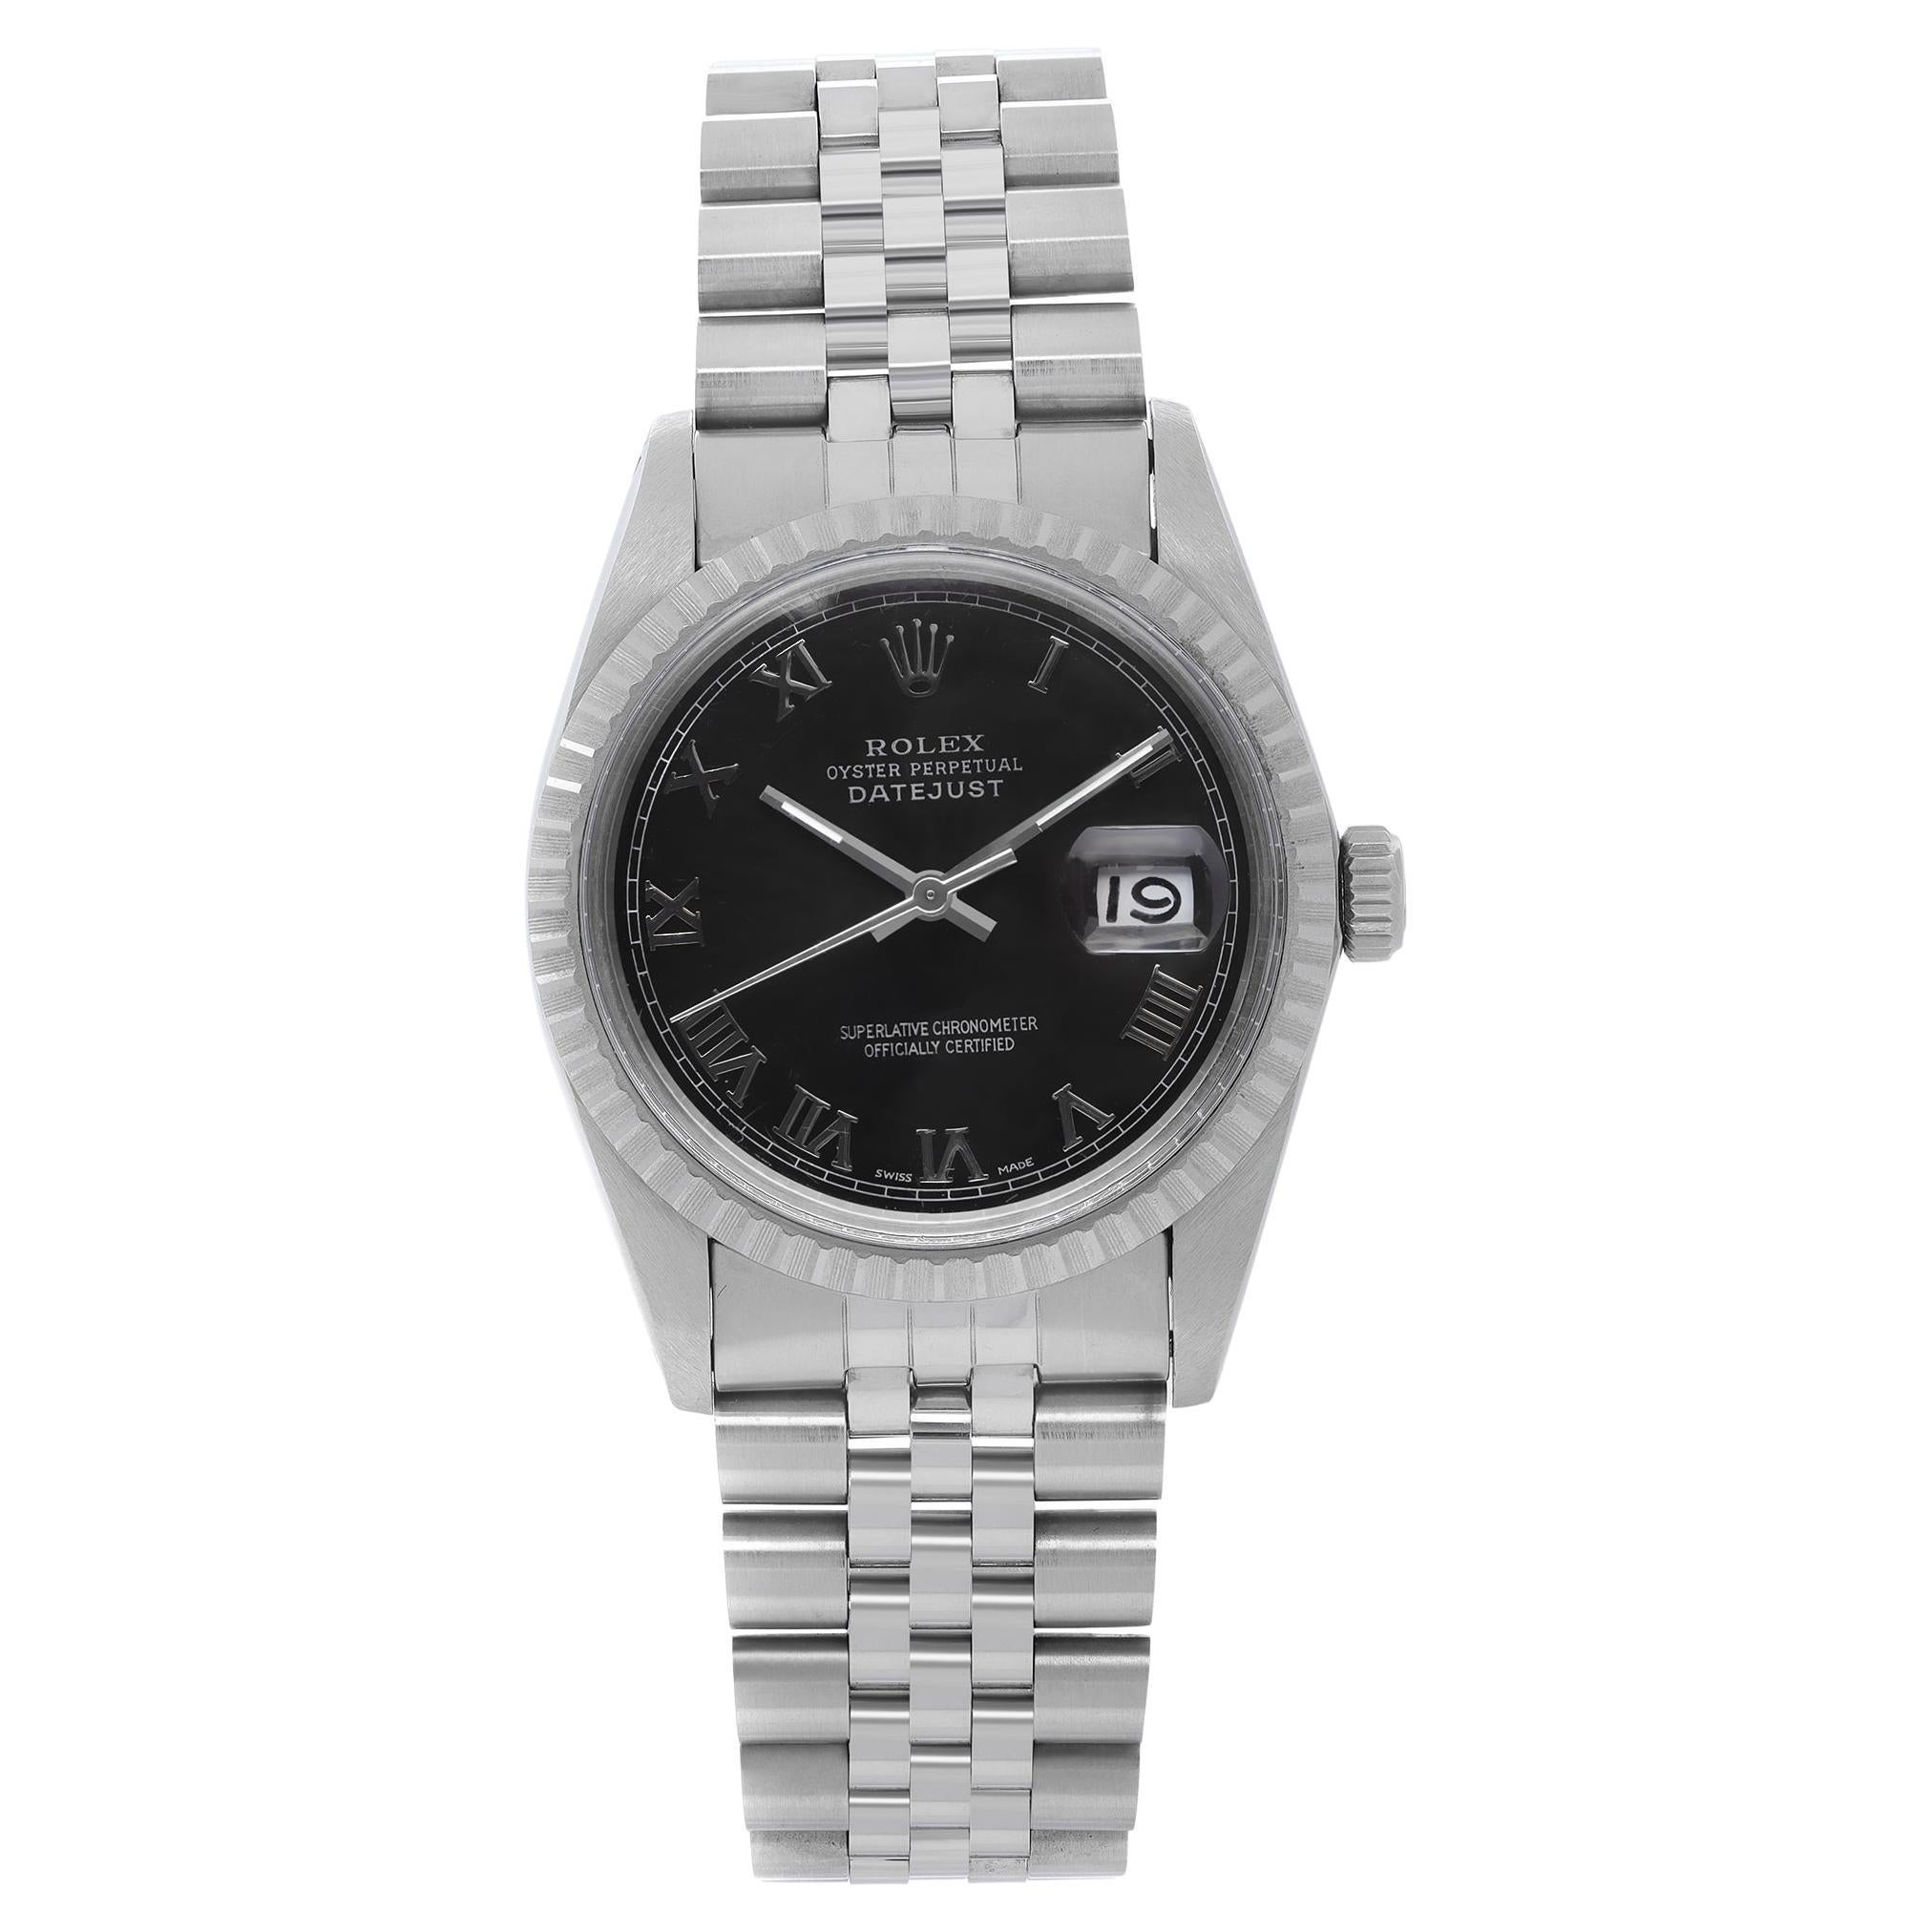 Rolex Datejust Jubilee Stainless Steel Silver Dial Automatic Watch 16030